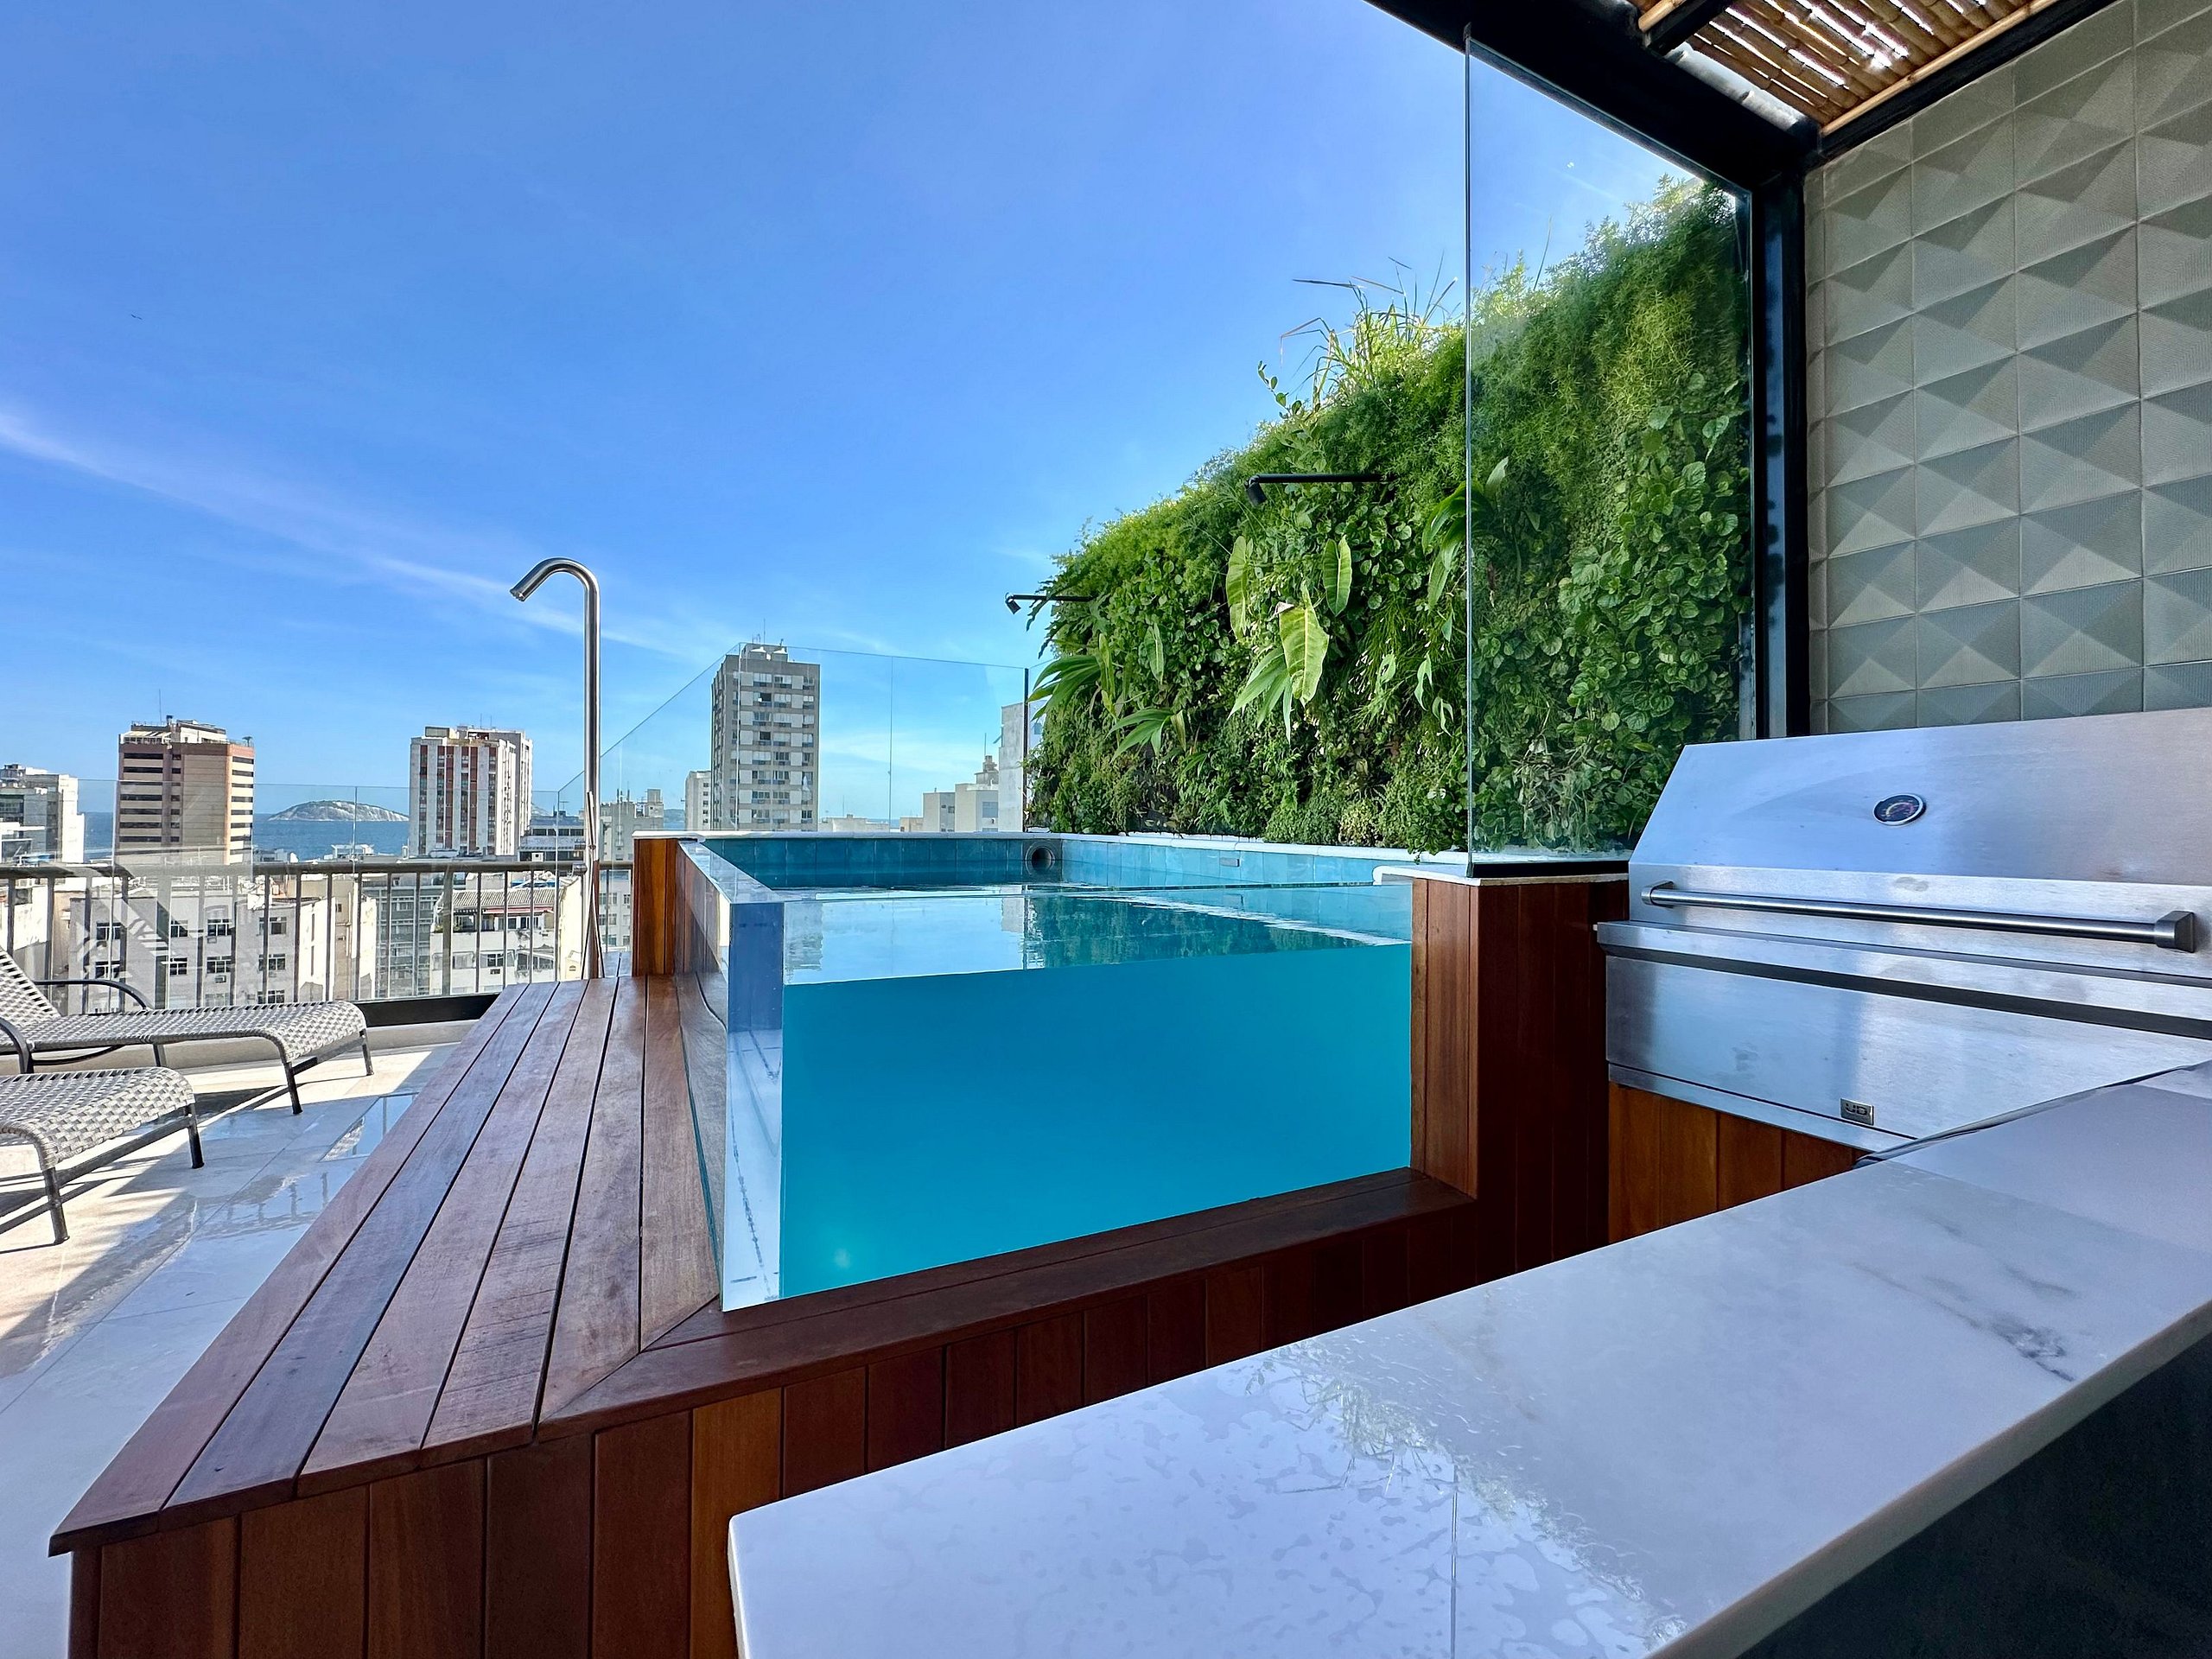 Property Image 1 - Luxury penthouse in Ipanema with an amazing view.